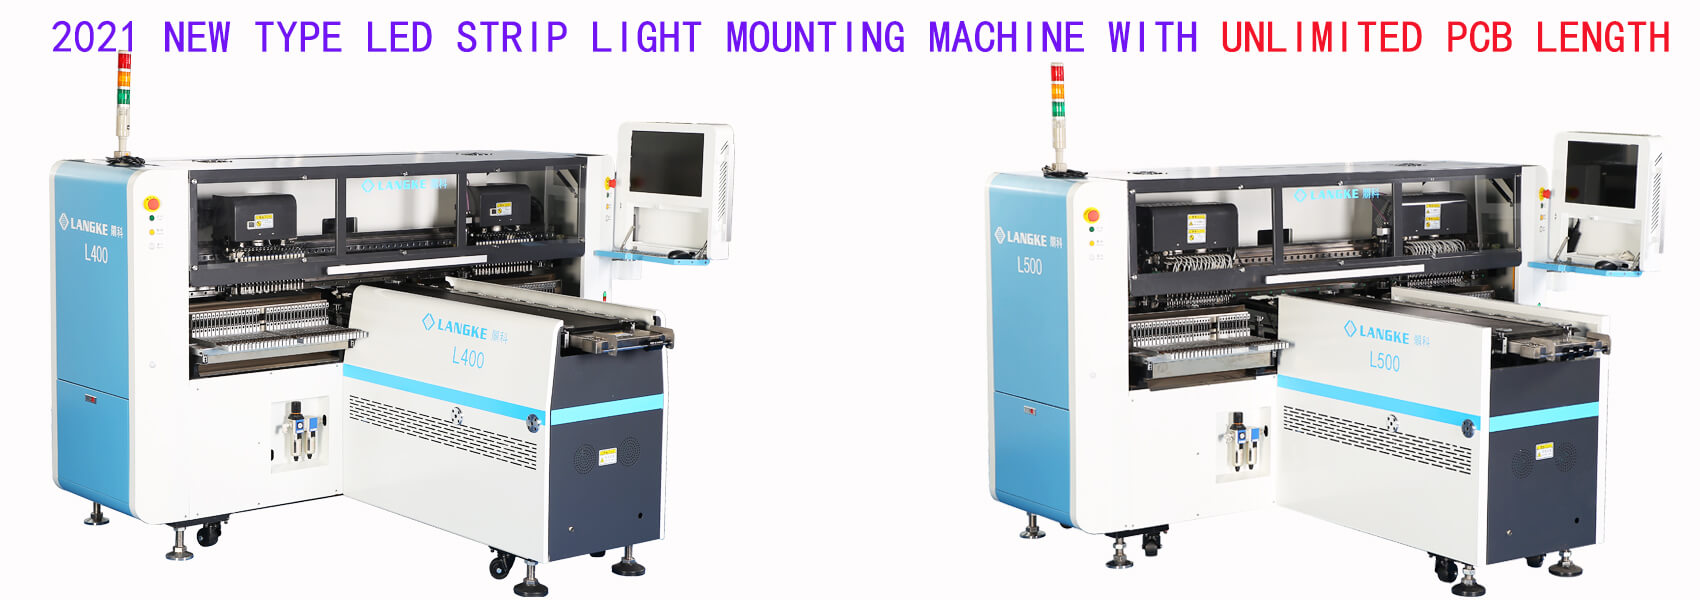 unlimited roll led strip light smt placement machine